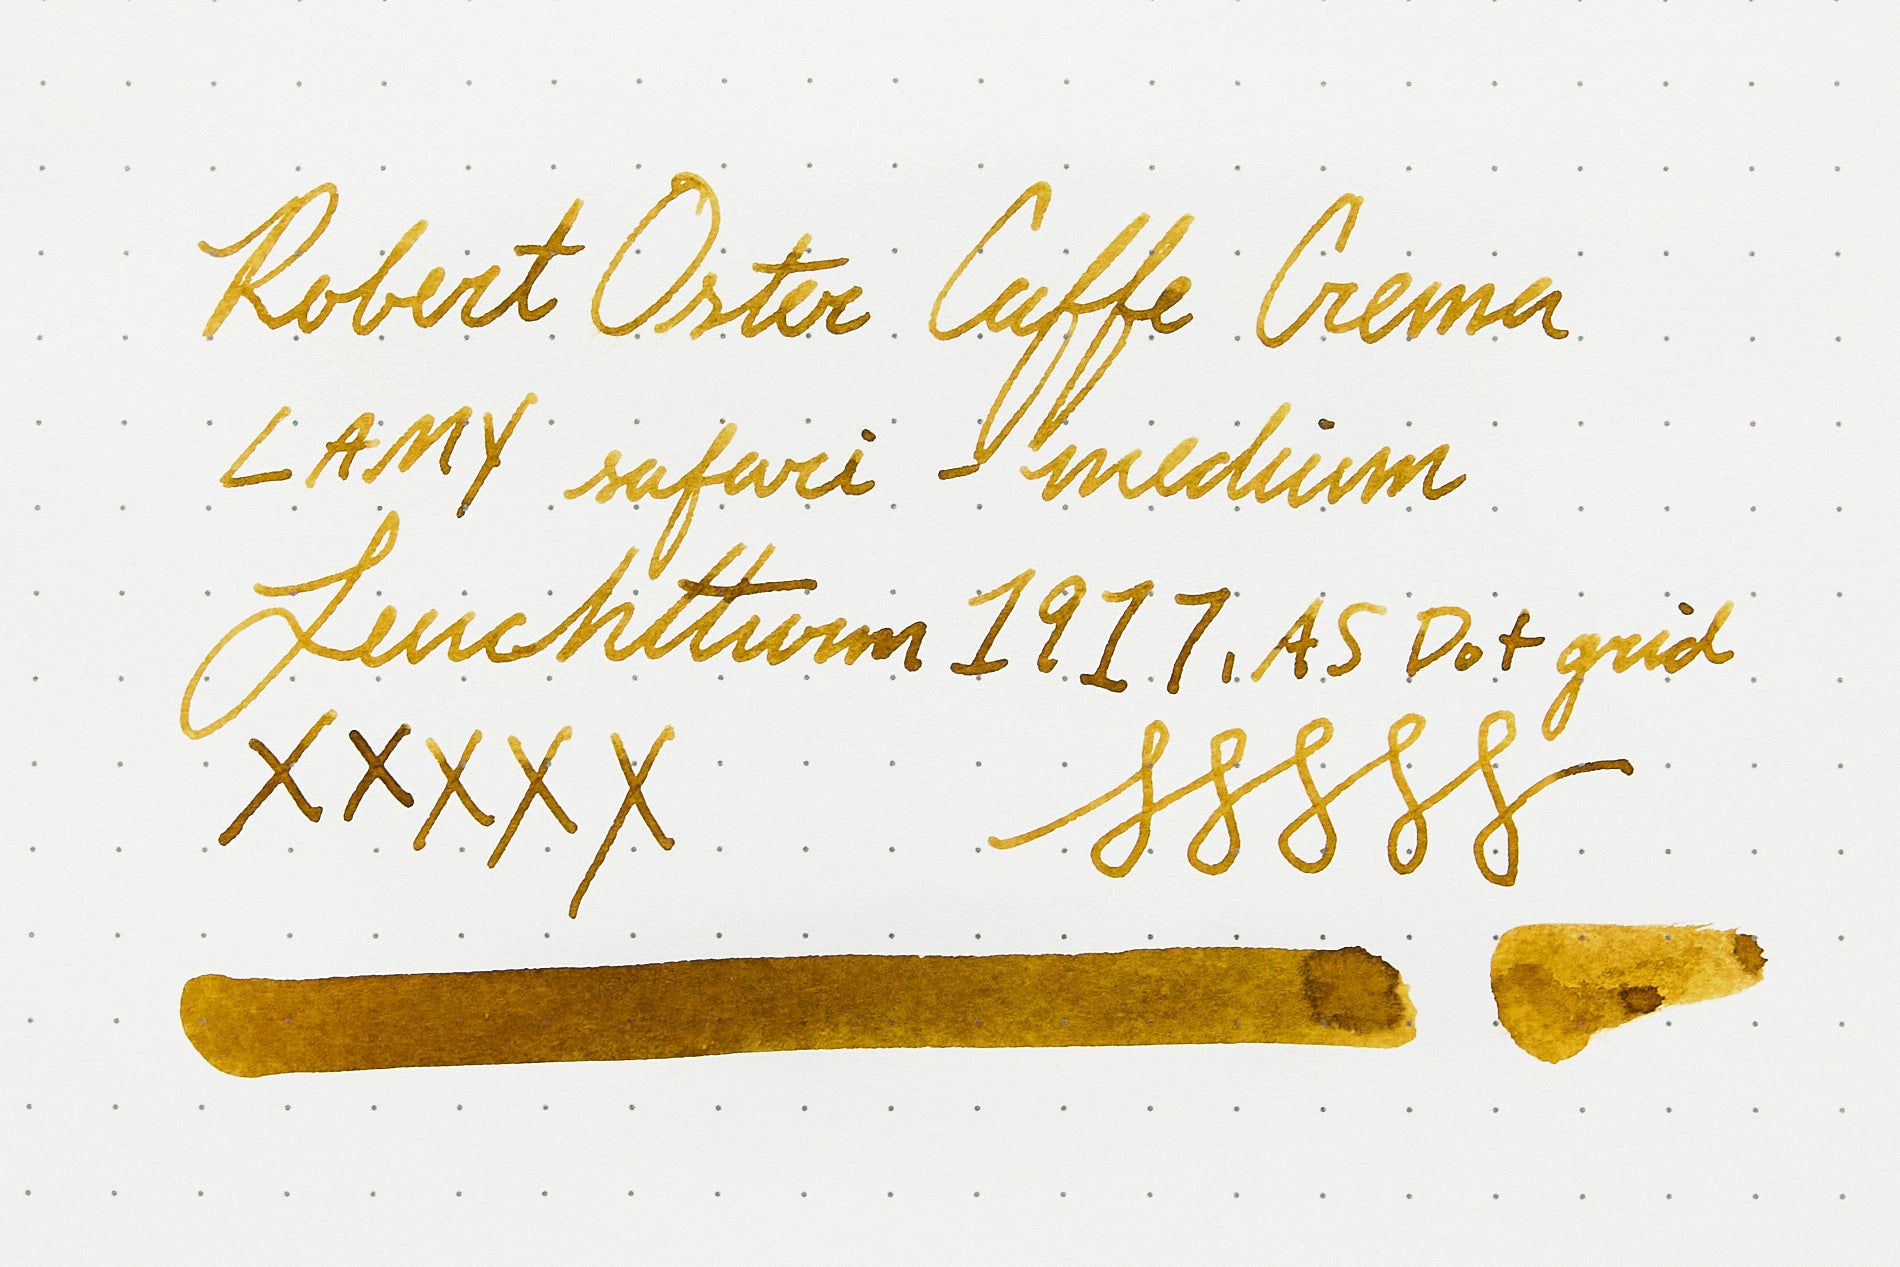 Robert Oster Caffe Crema fountain pen ink writing sample on cream colored dot grid paper